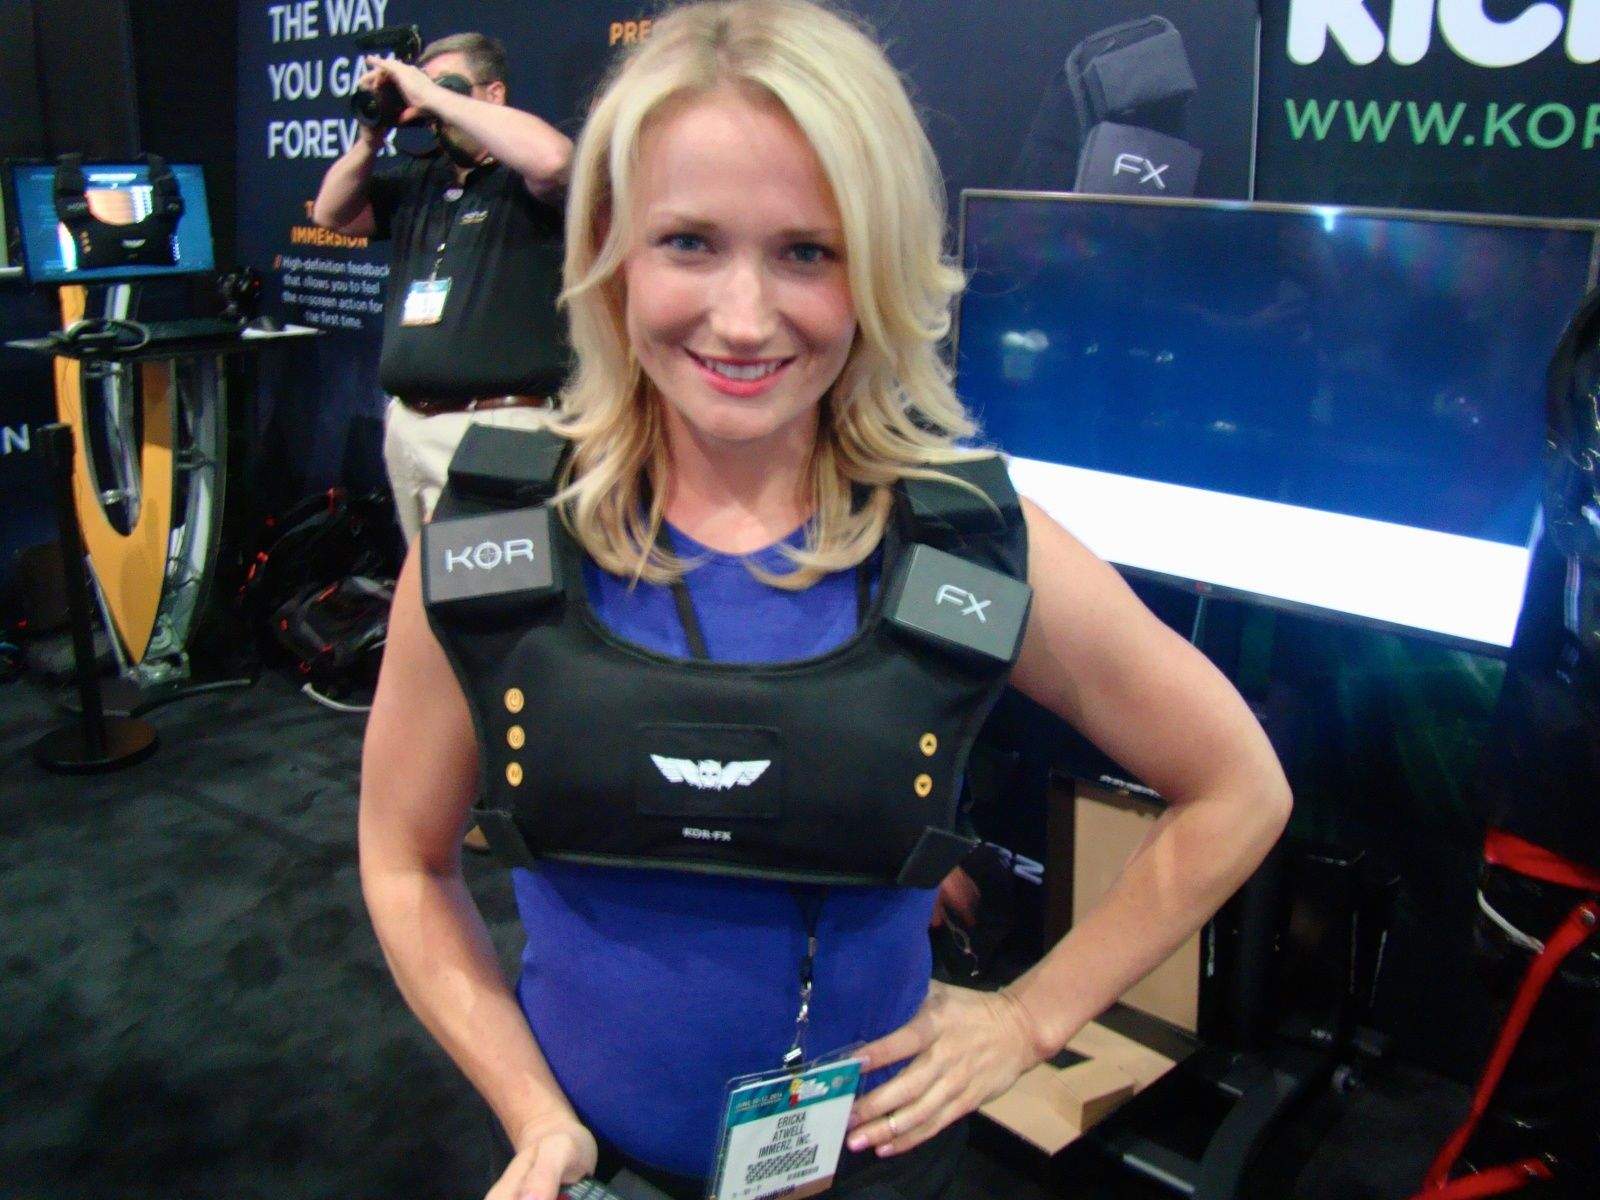 The KOR-FX Vest modeled by an actress at the E3 booth. Photo: Rob LeFebvre/Cult of Mac